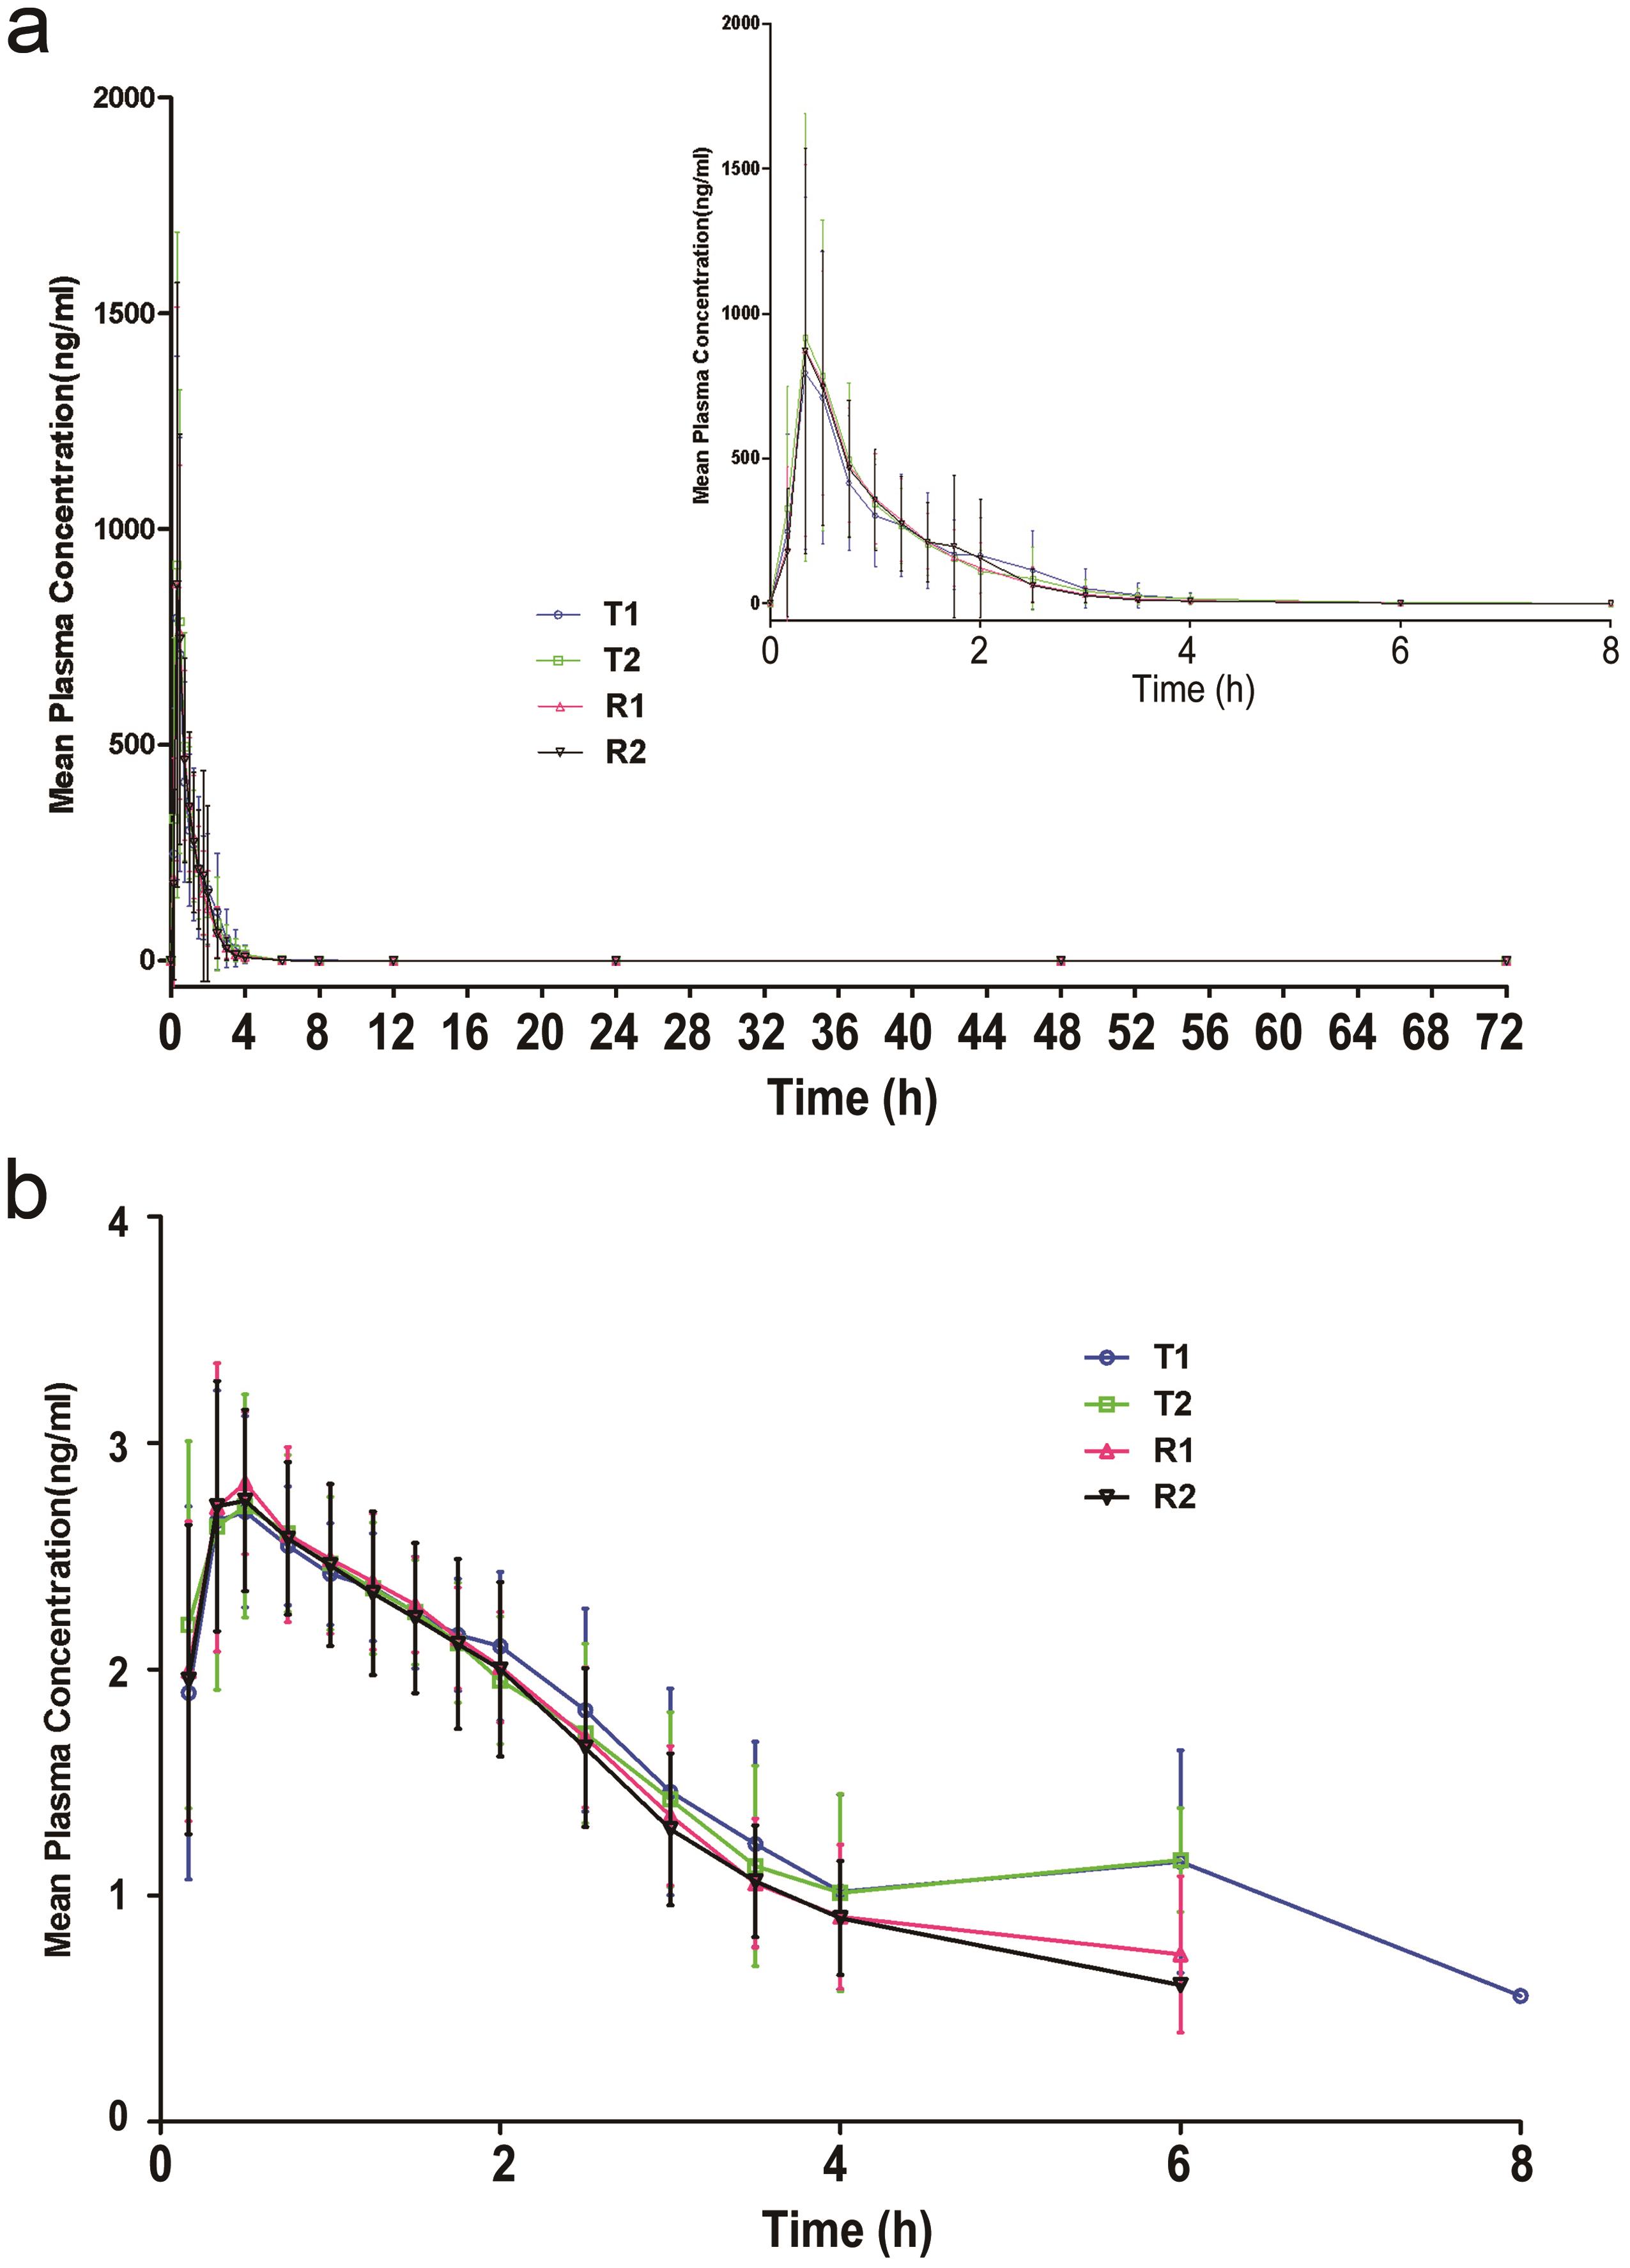 Mean plasma concentration-time curves (a) and semi-logarithmic curves (b) of the generic or test (T) and the band-named or reference (R) products of sofosbuvir under the fasting condition.